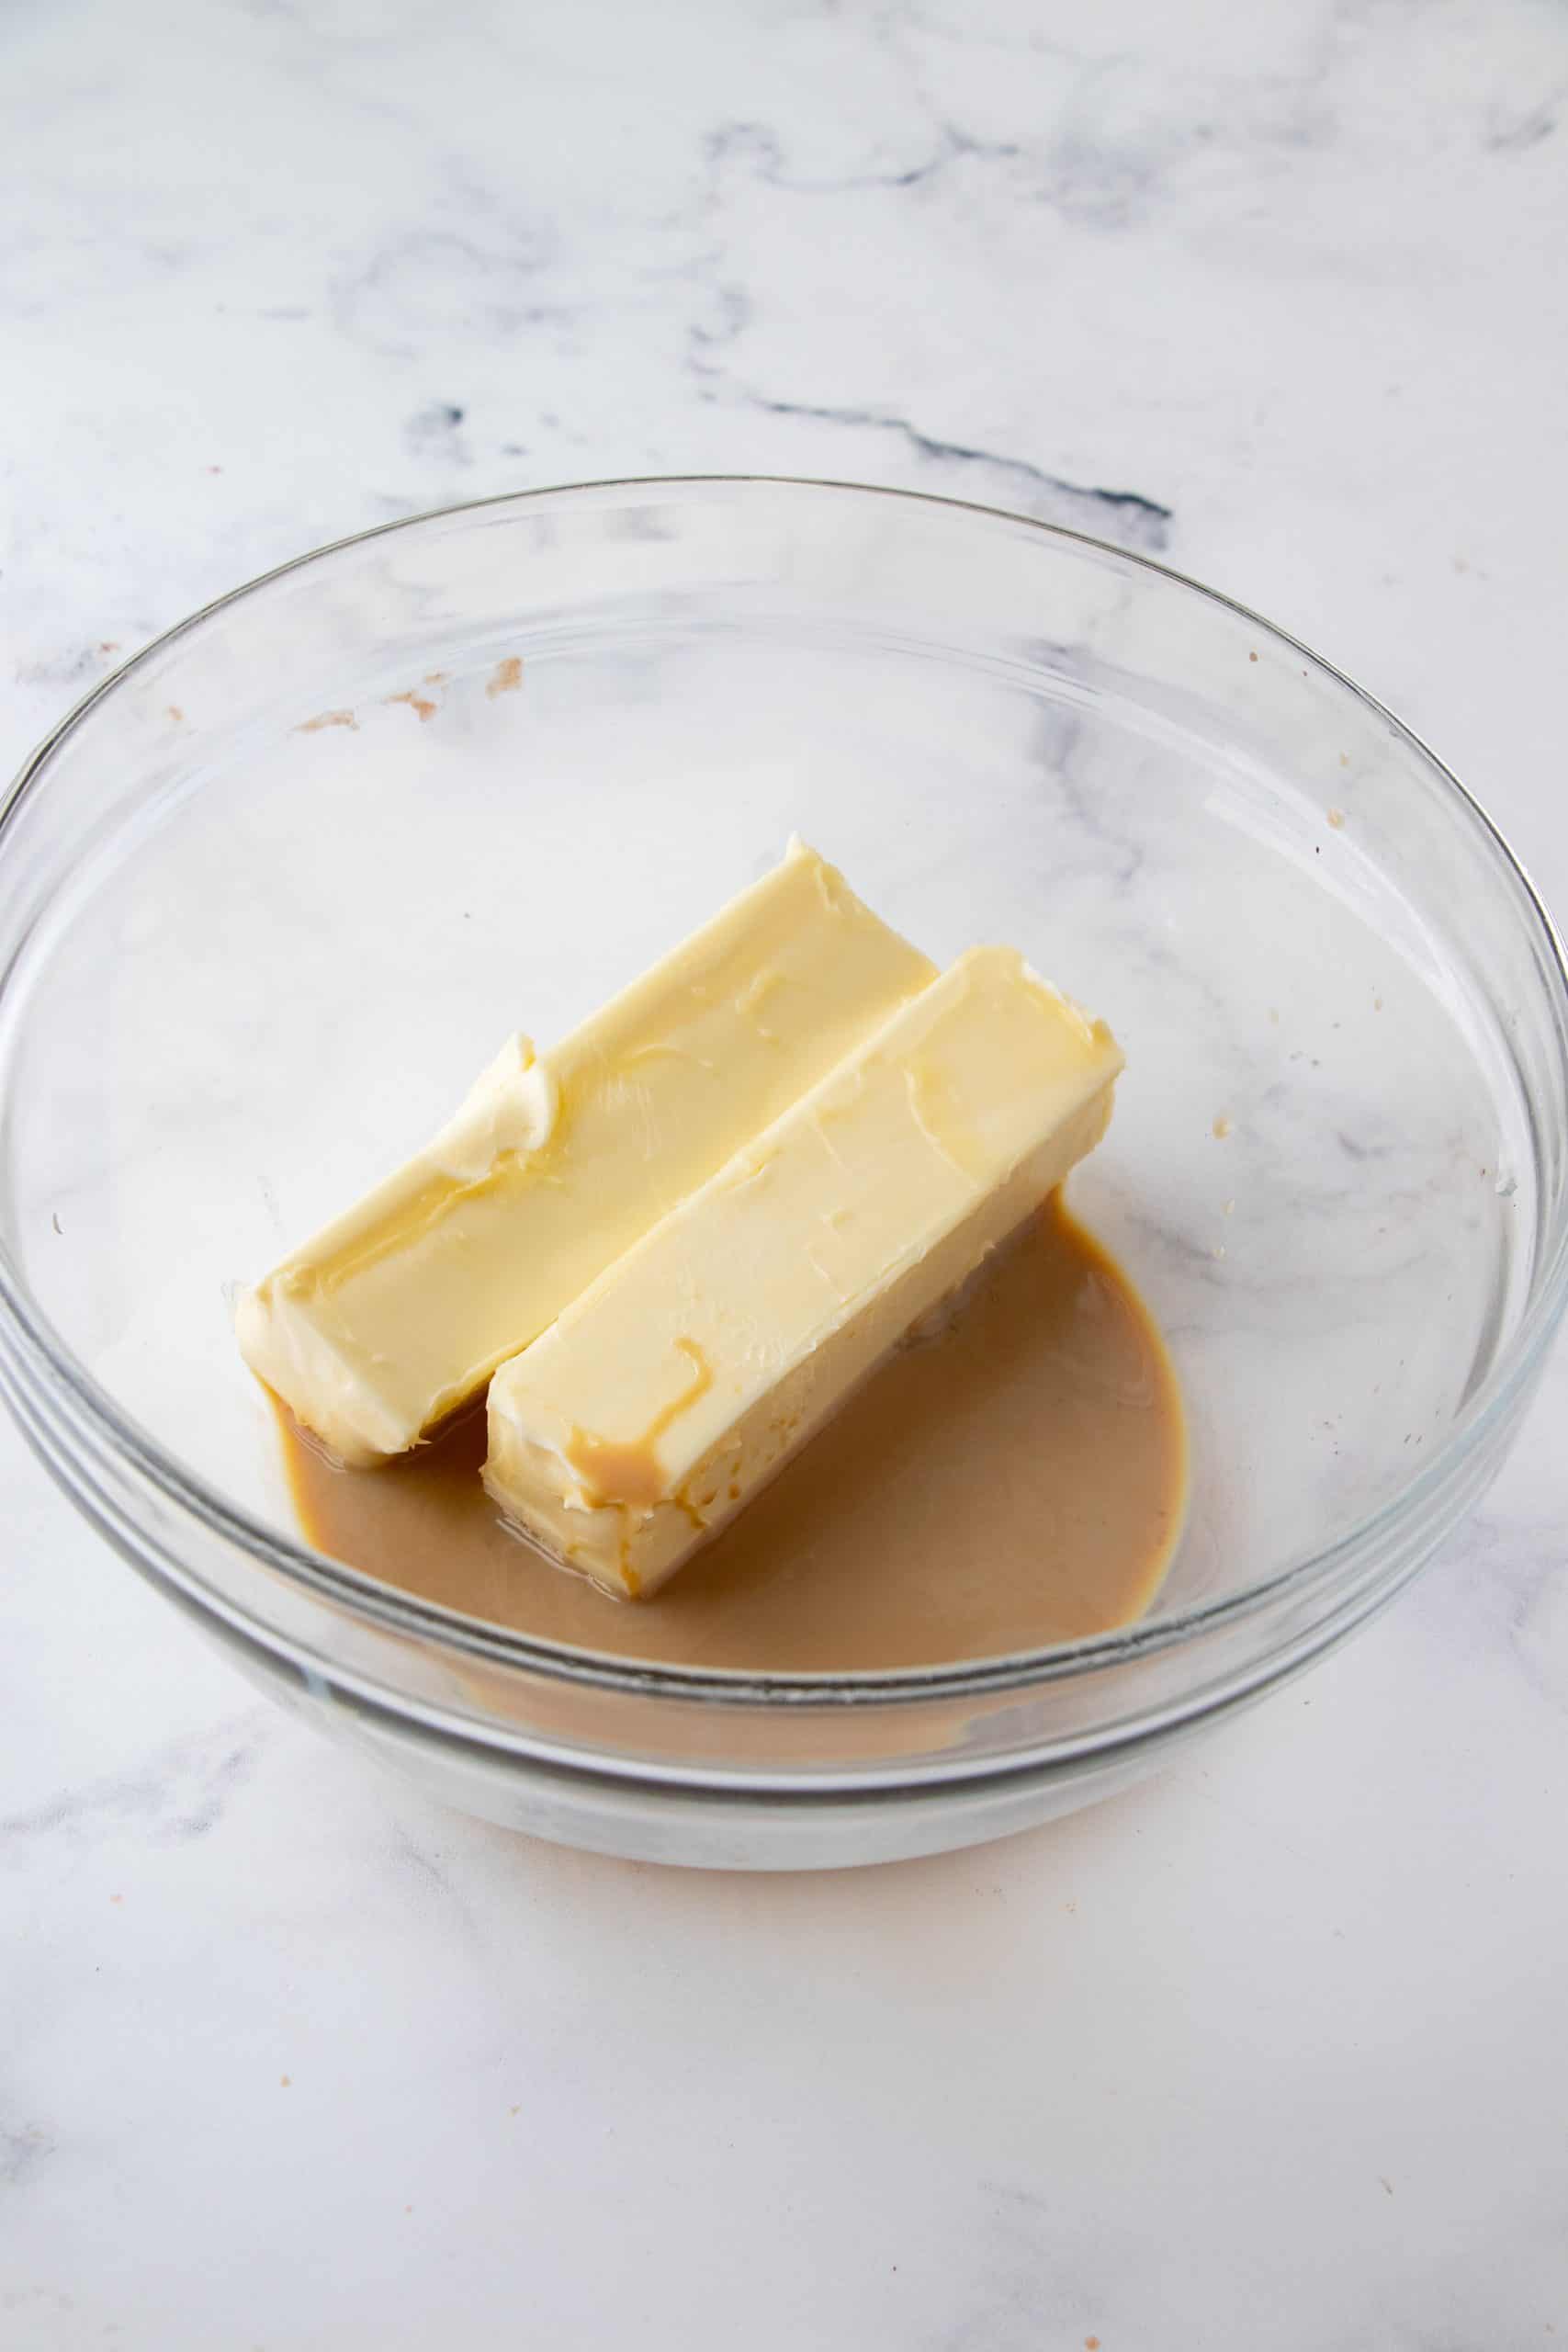 Butter and Baileys in bowl.